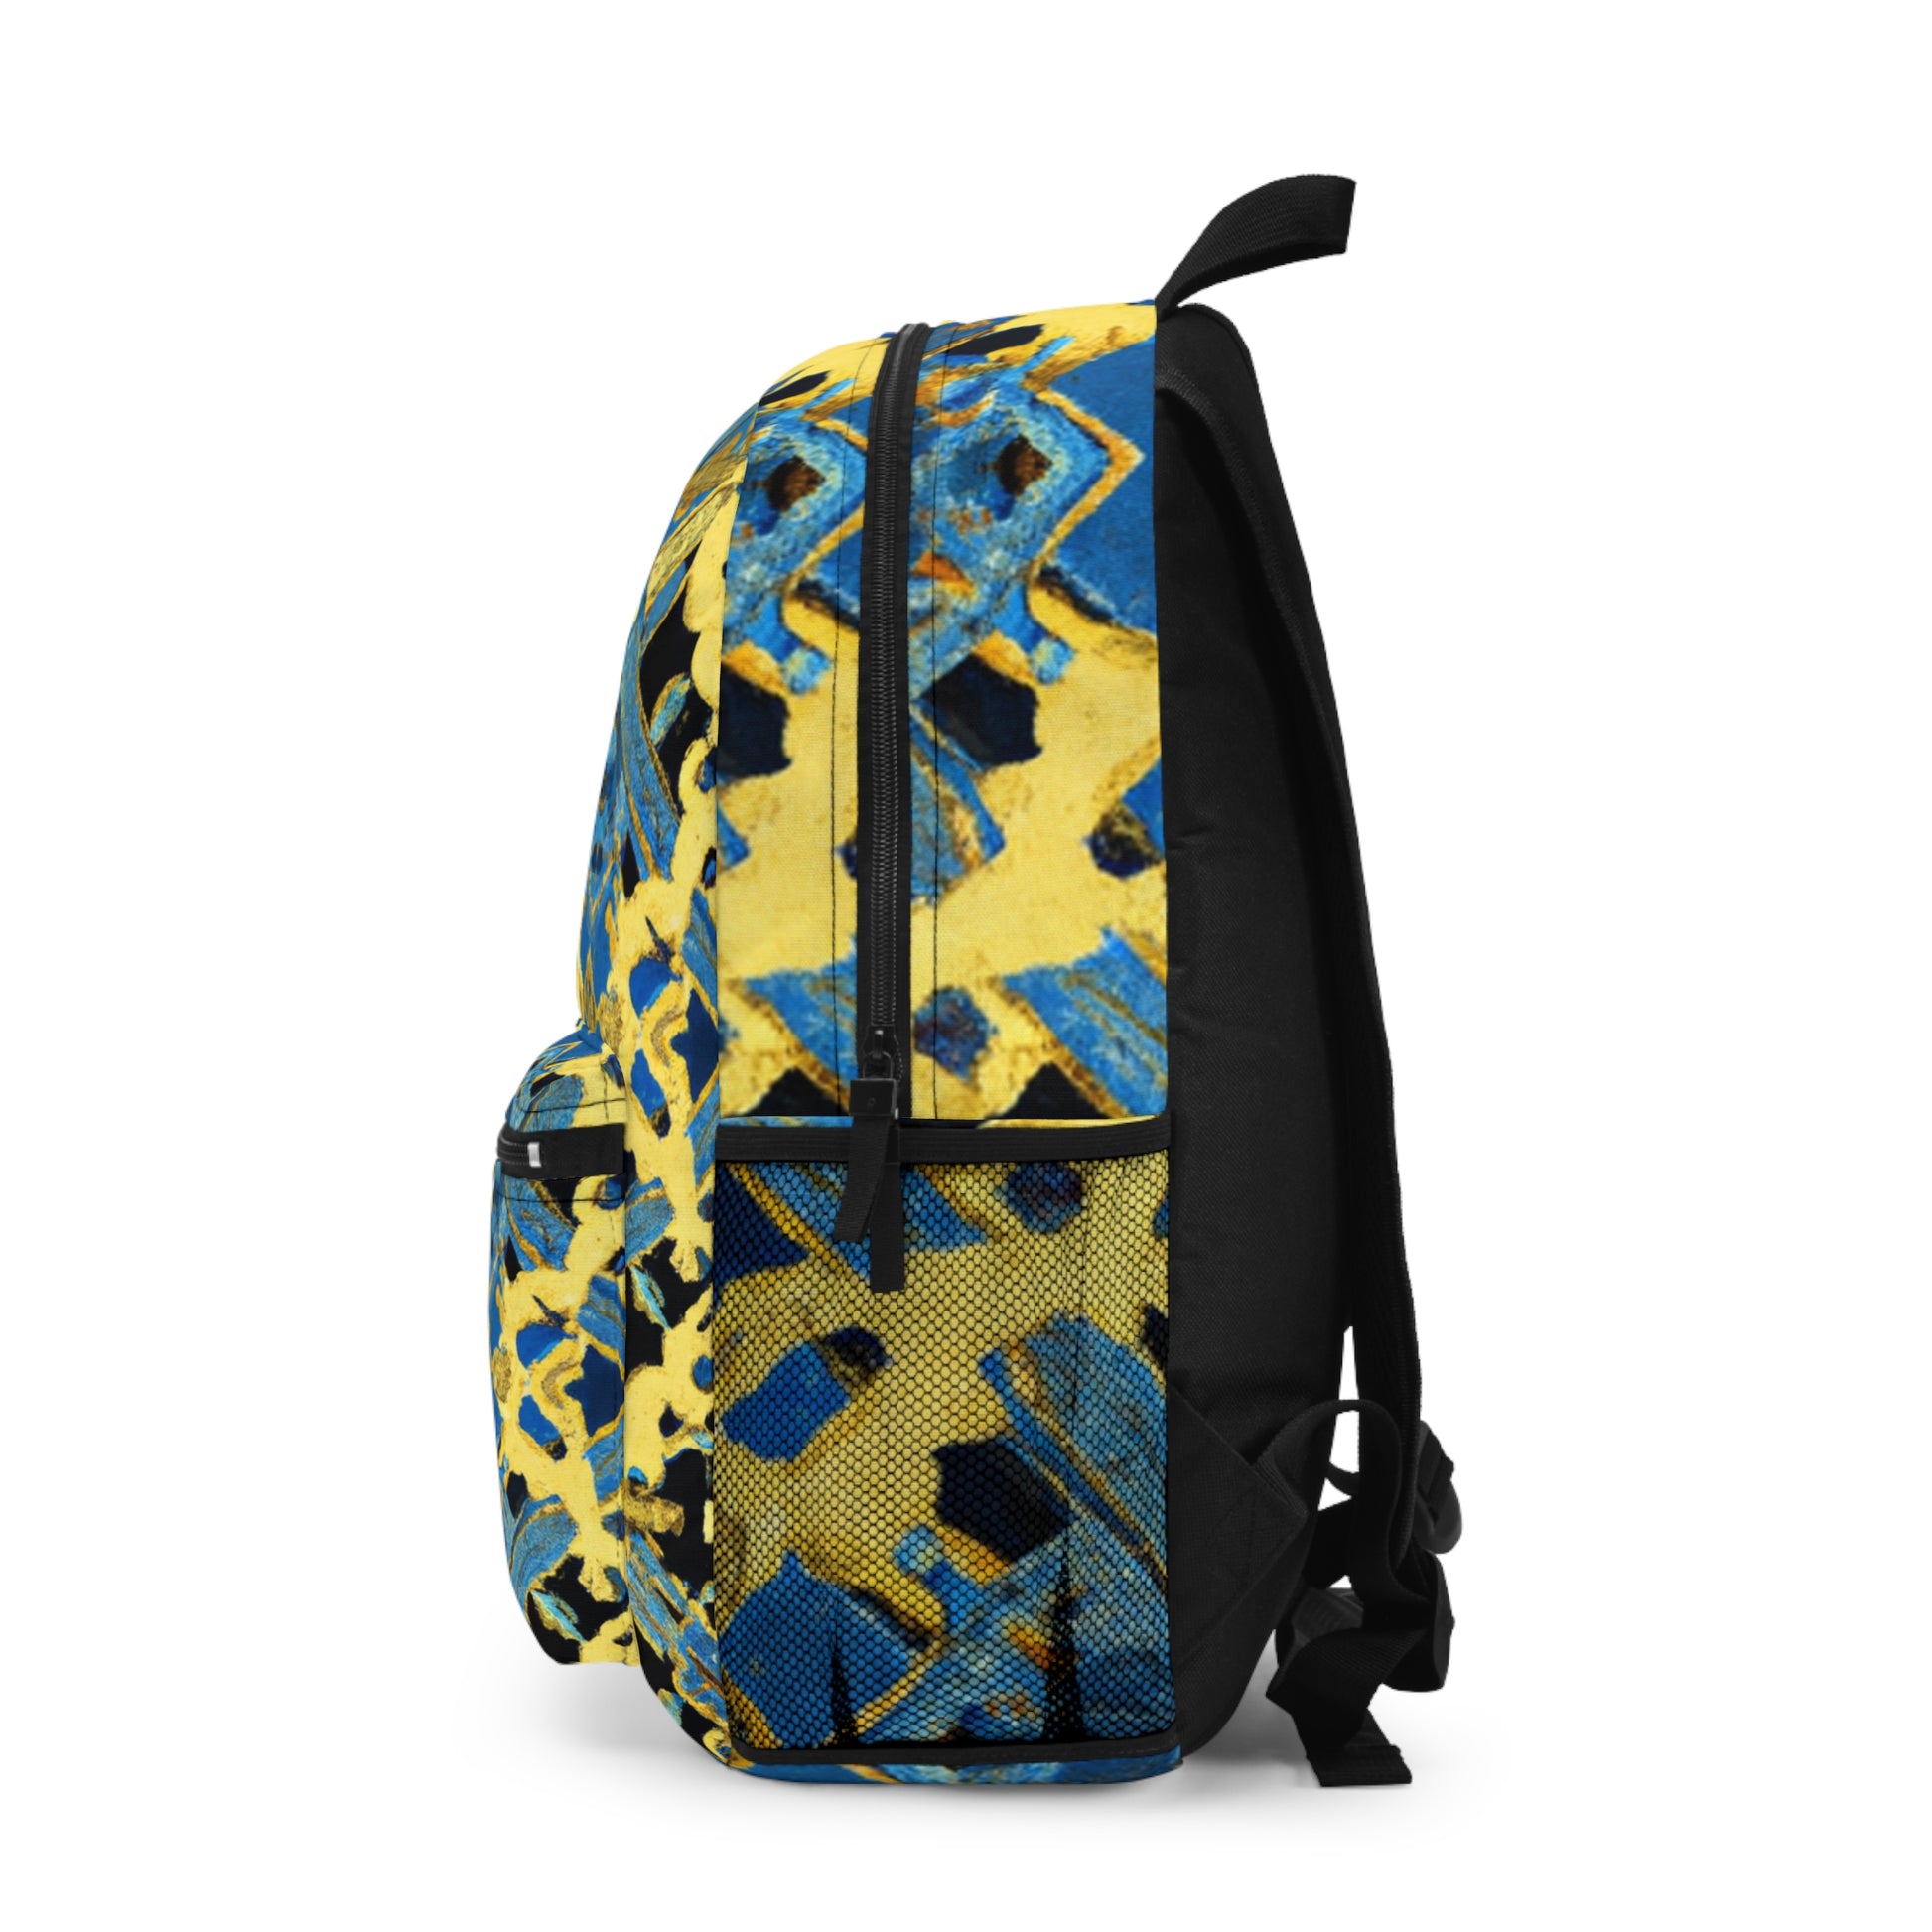 Adele Cooper. - Backpack – Infusion Print